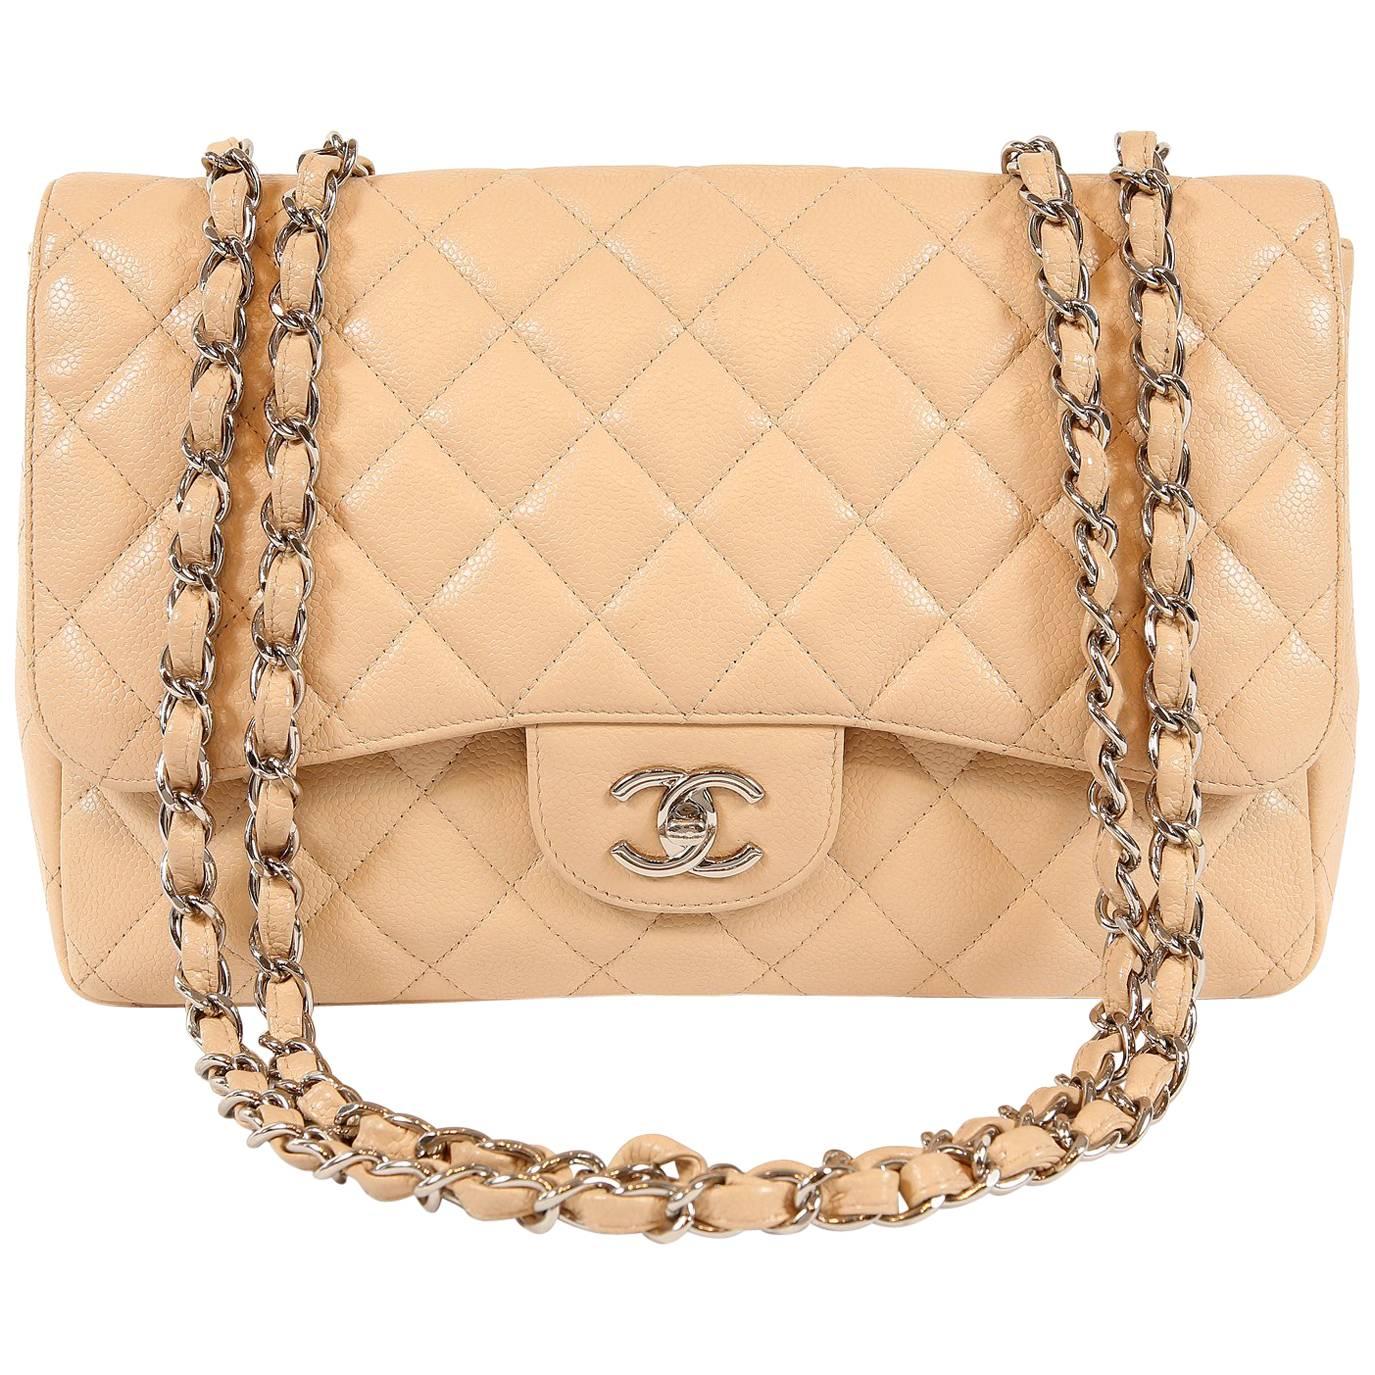 Chanel Beige Clair Caviar Leather Jumbo Classic Flap Bag with Silver HW